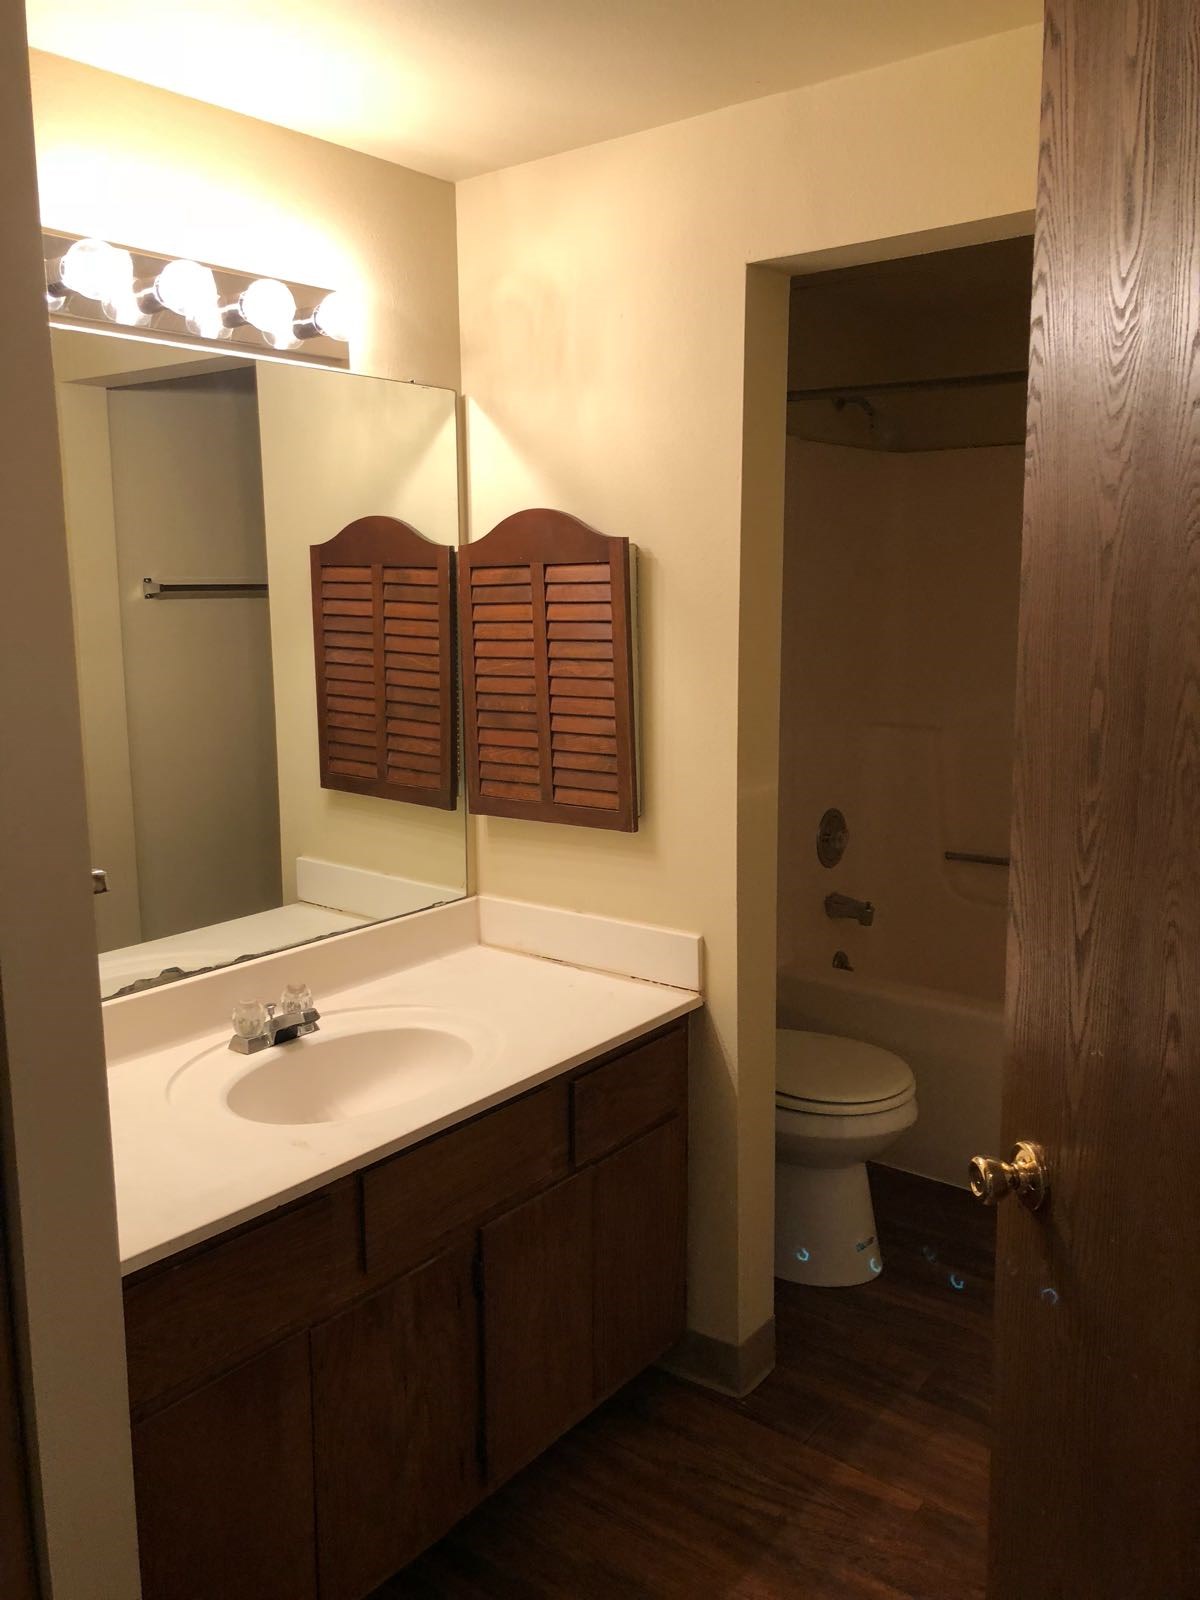 Private Room For Rent In 2 Bed Apartment Near Downtown